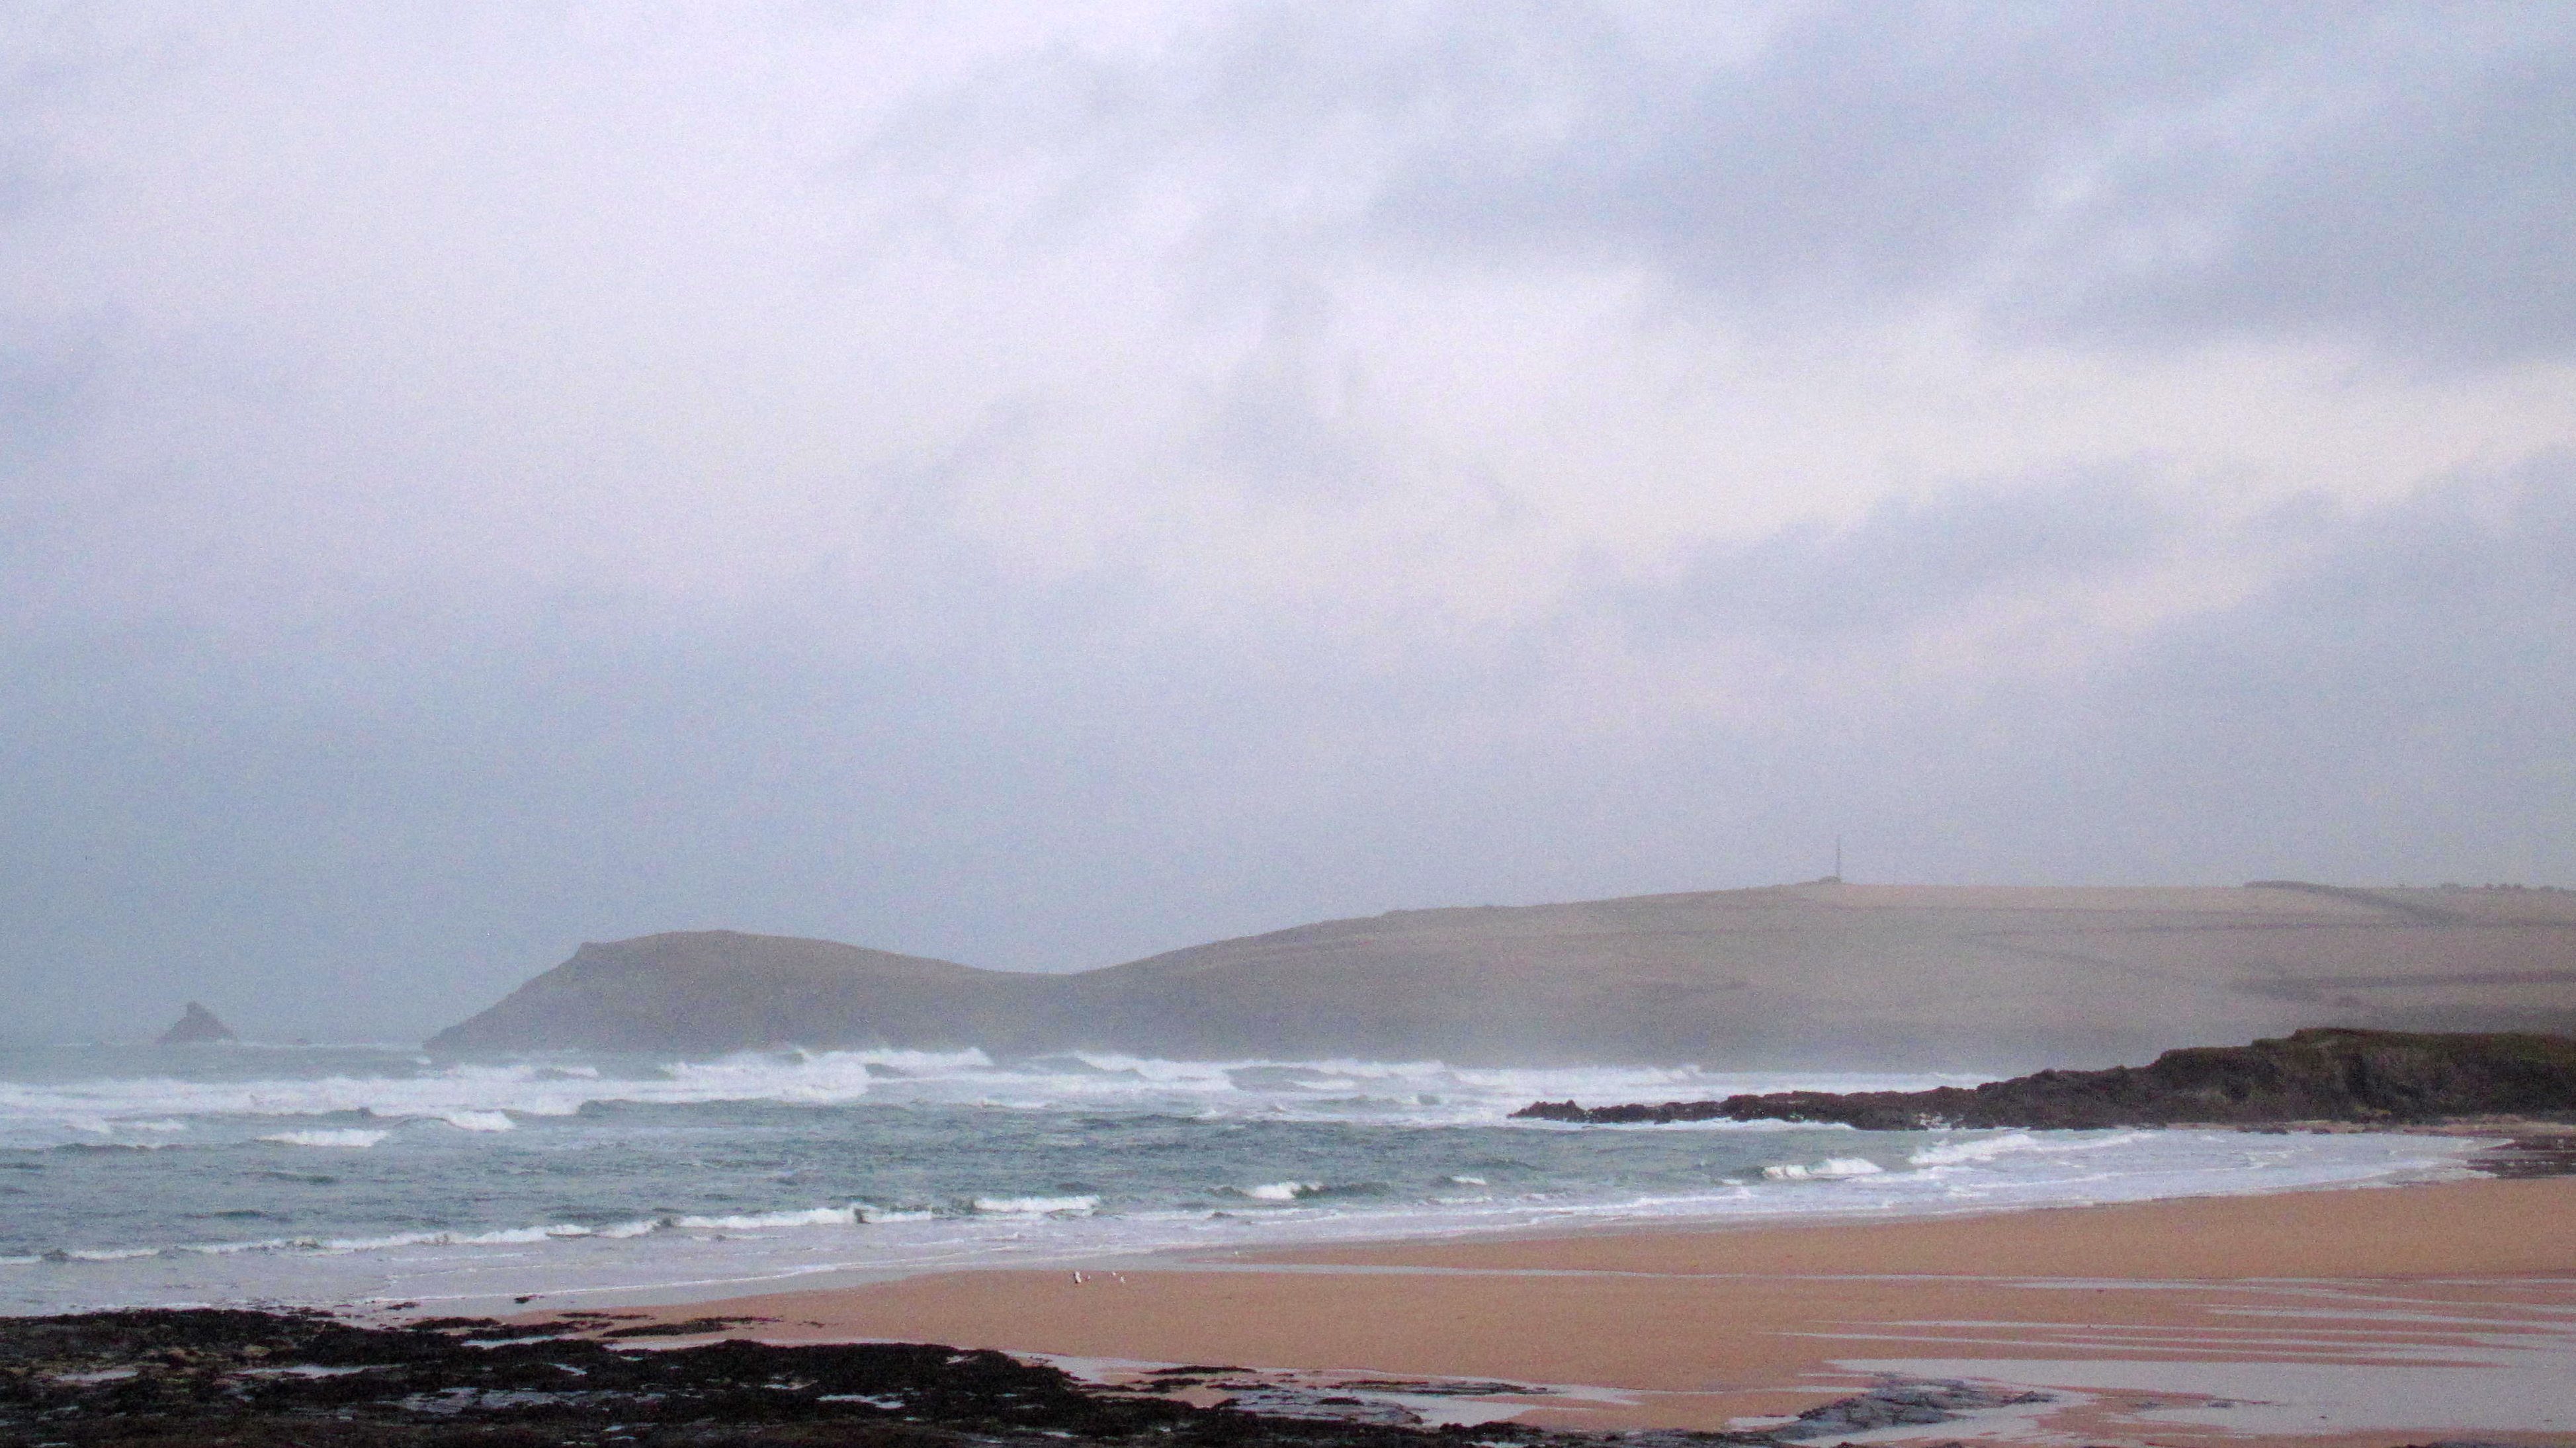 Surf Report for Friday 17th October 2014